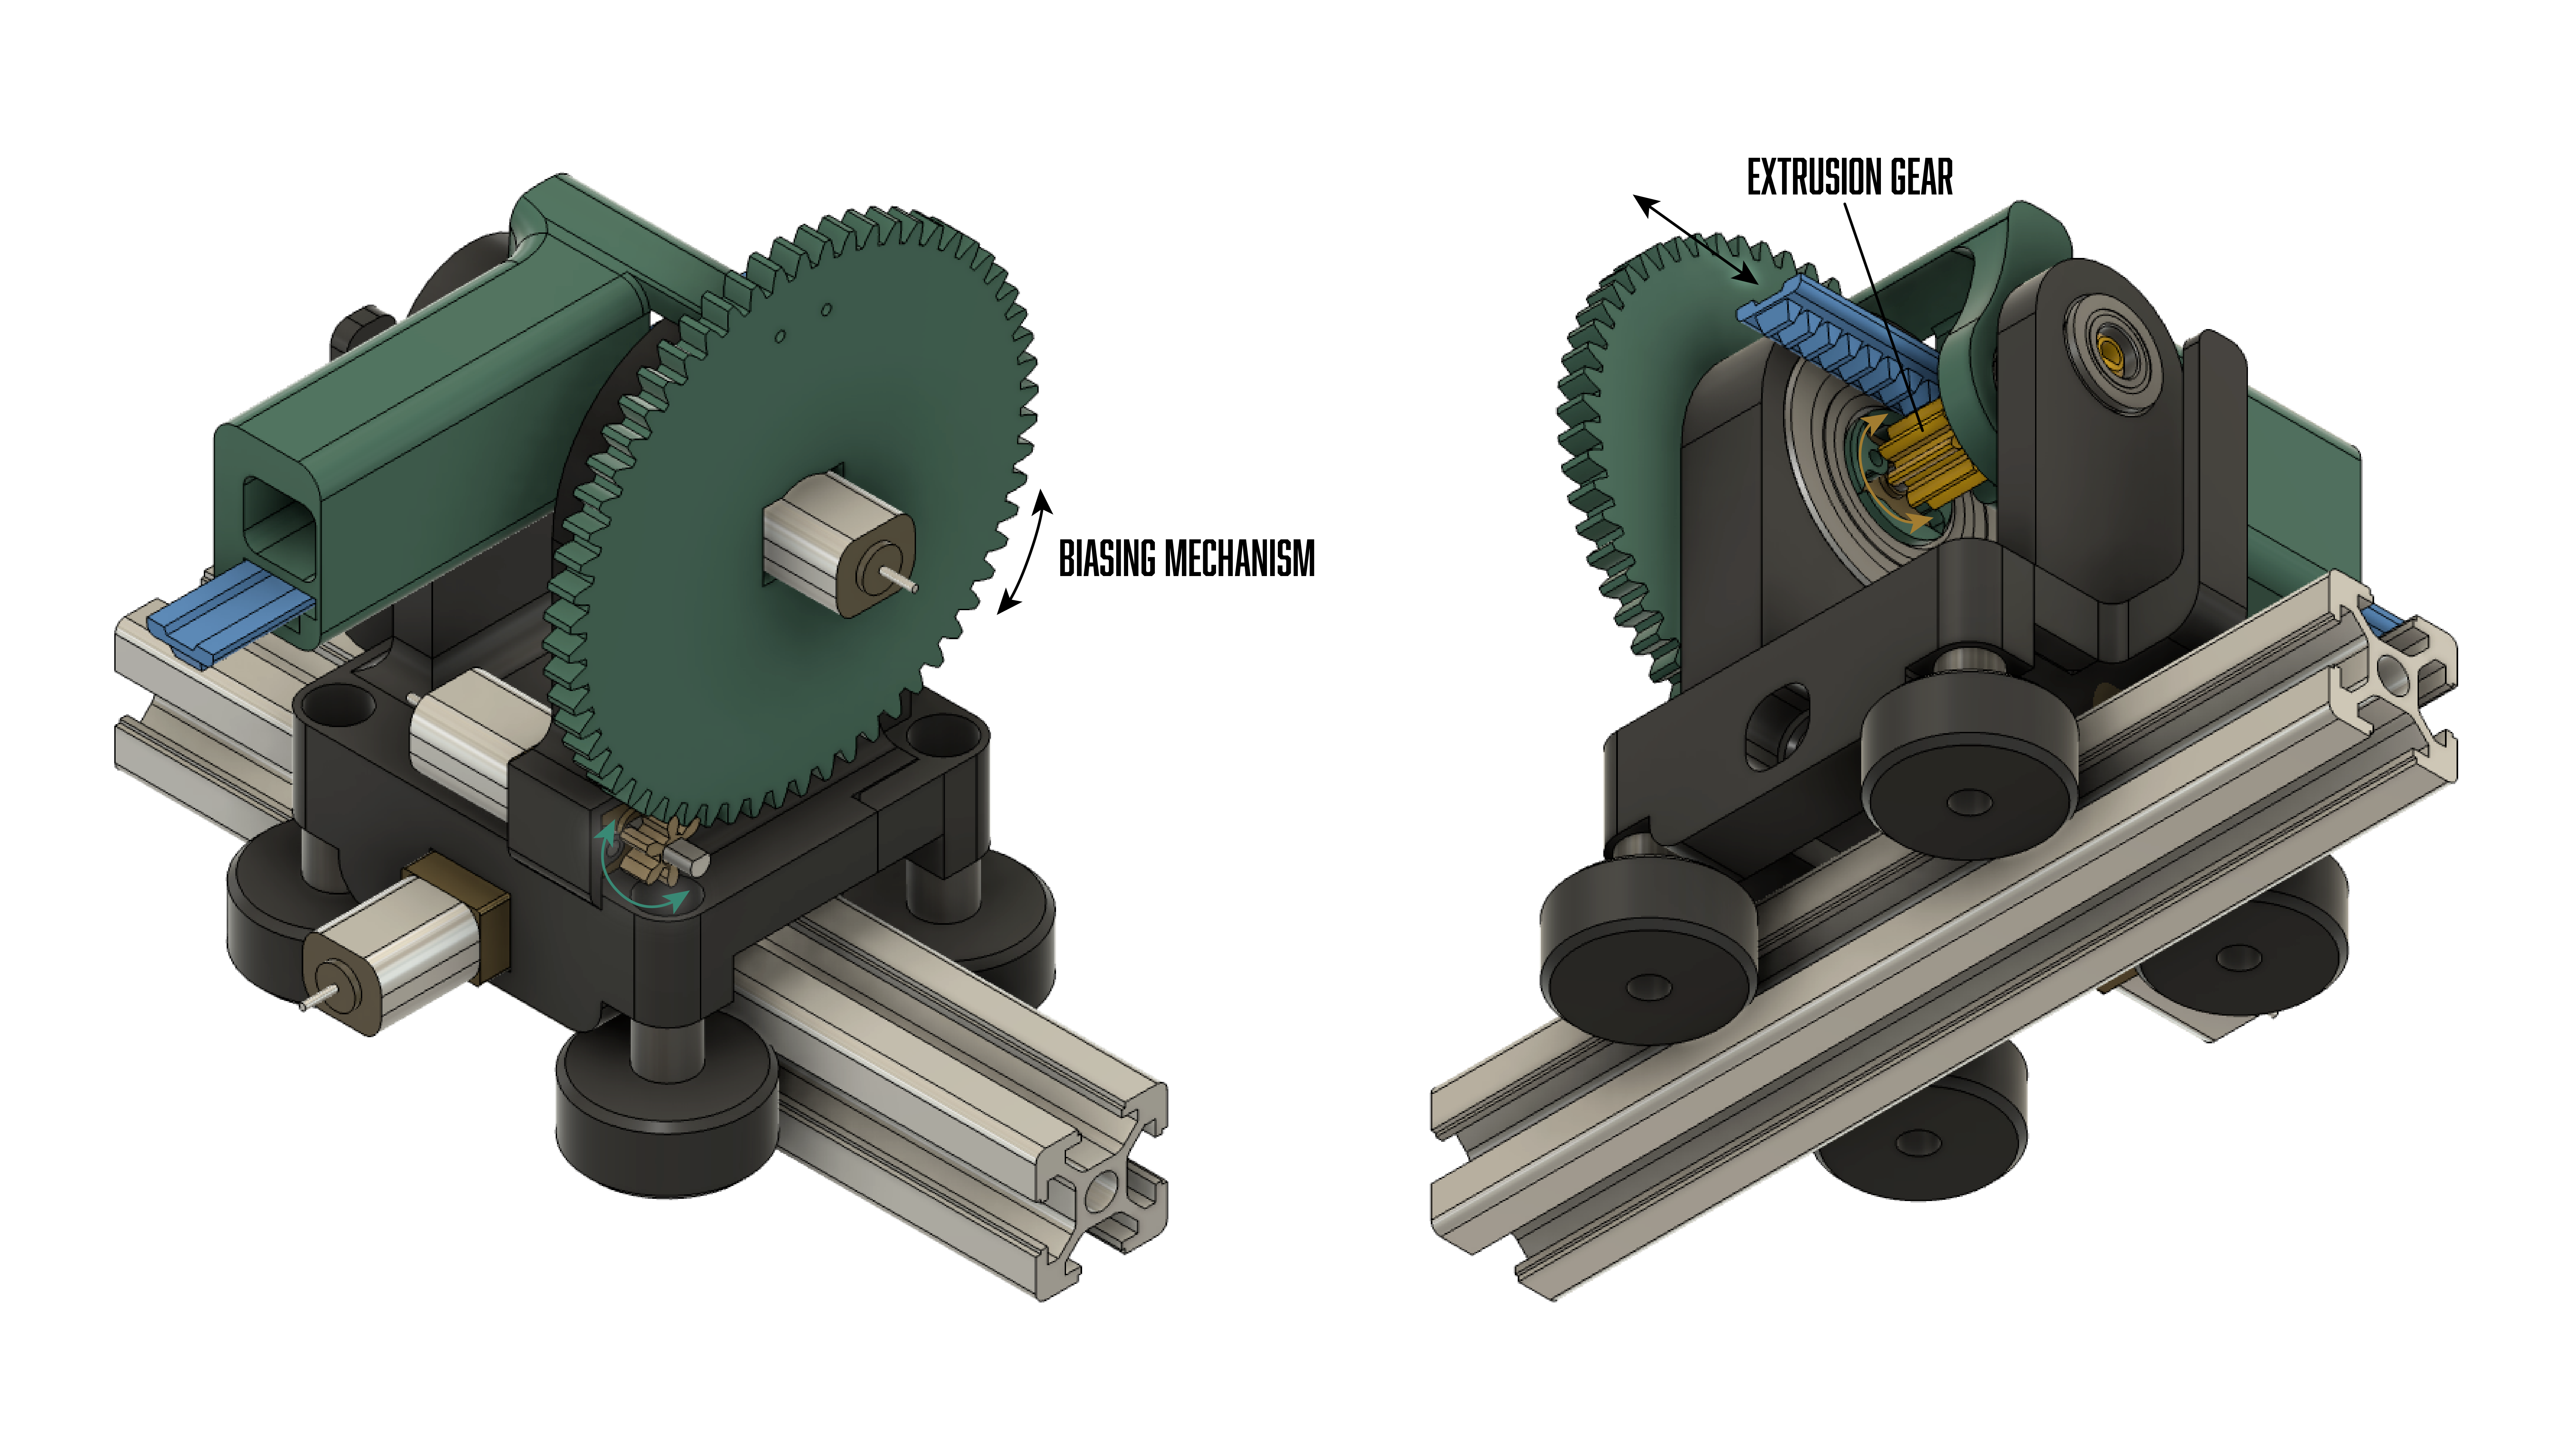 Extrusion nodes have an additional motor for extruding the rack into the system